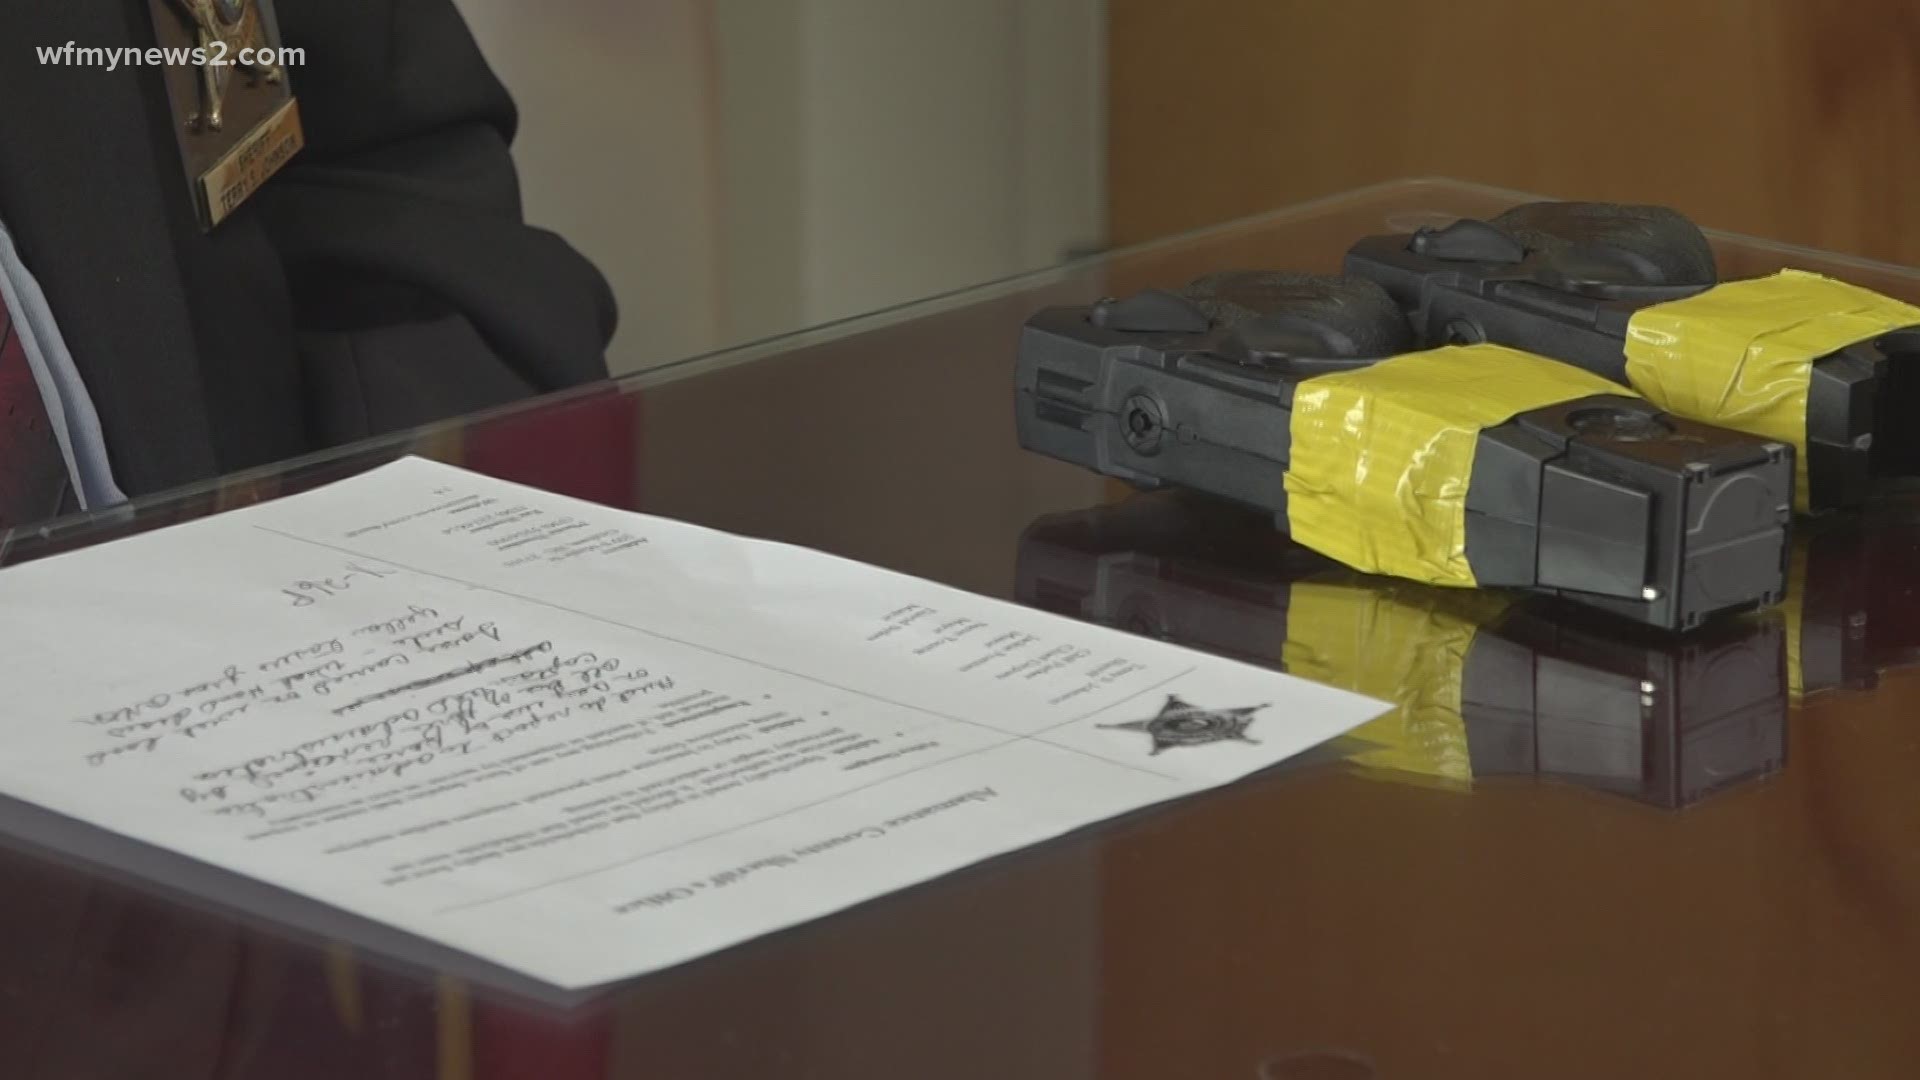 Sheriff Terry Johnson said his office will mark Tasers with yellow tape to distinguish them from firearms.